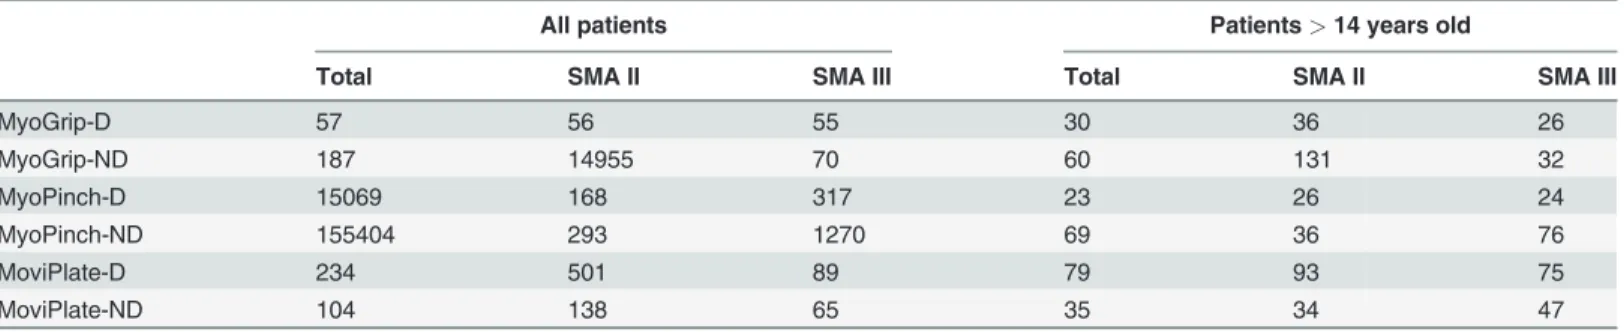 Table 7. Sample size per group to include in a clinical trial to detect a stabilization of motor function on dominant (D) and non-dominant (ND) sides over a year.